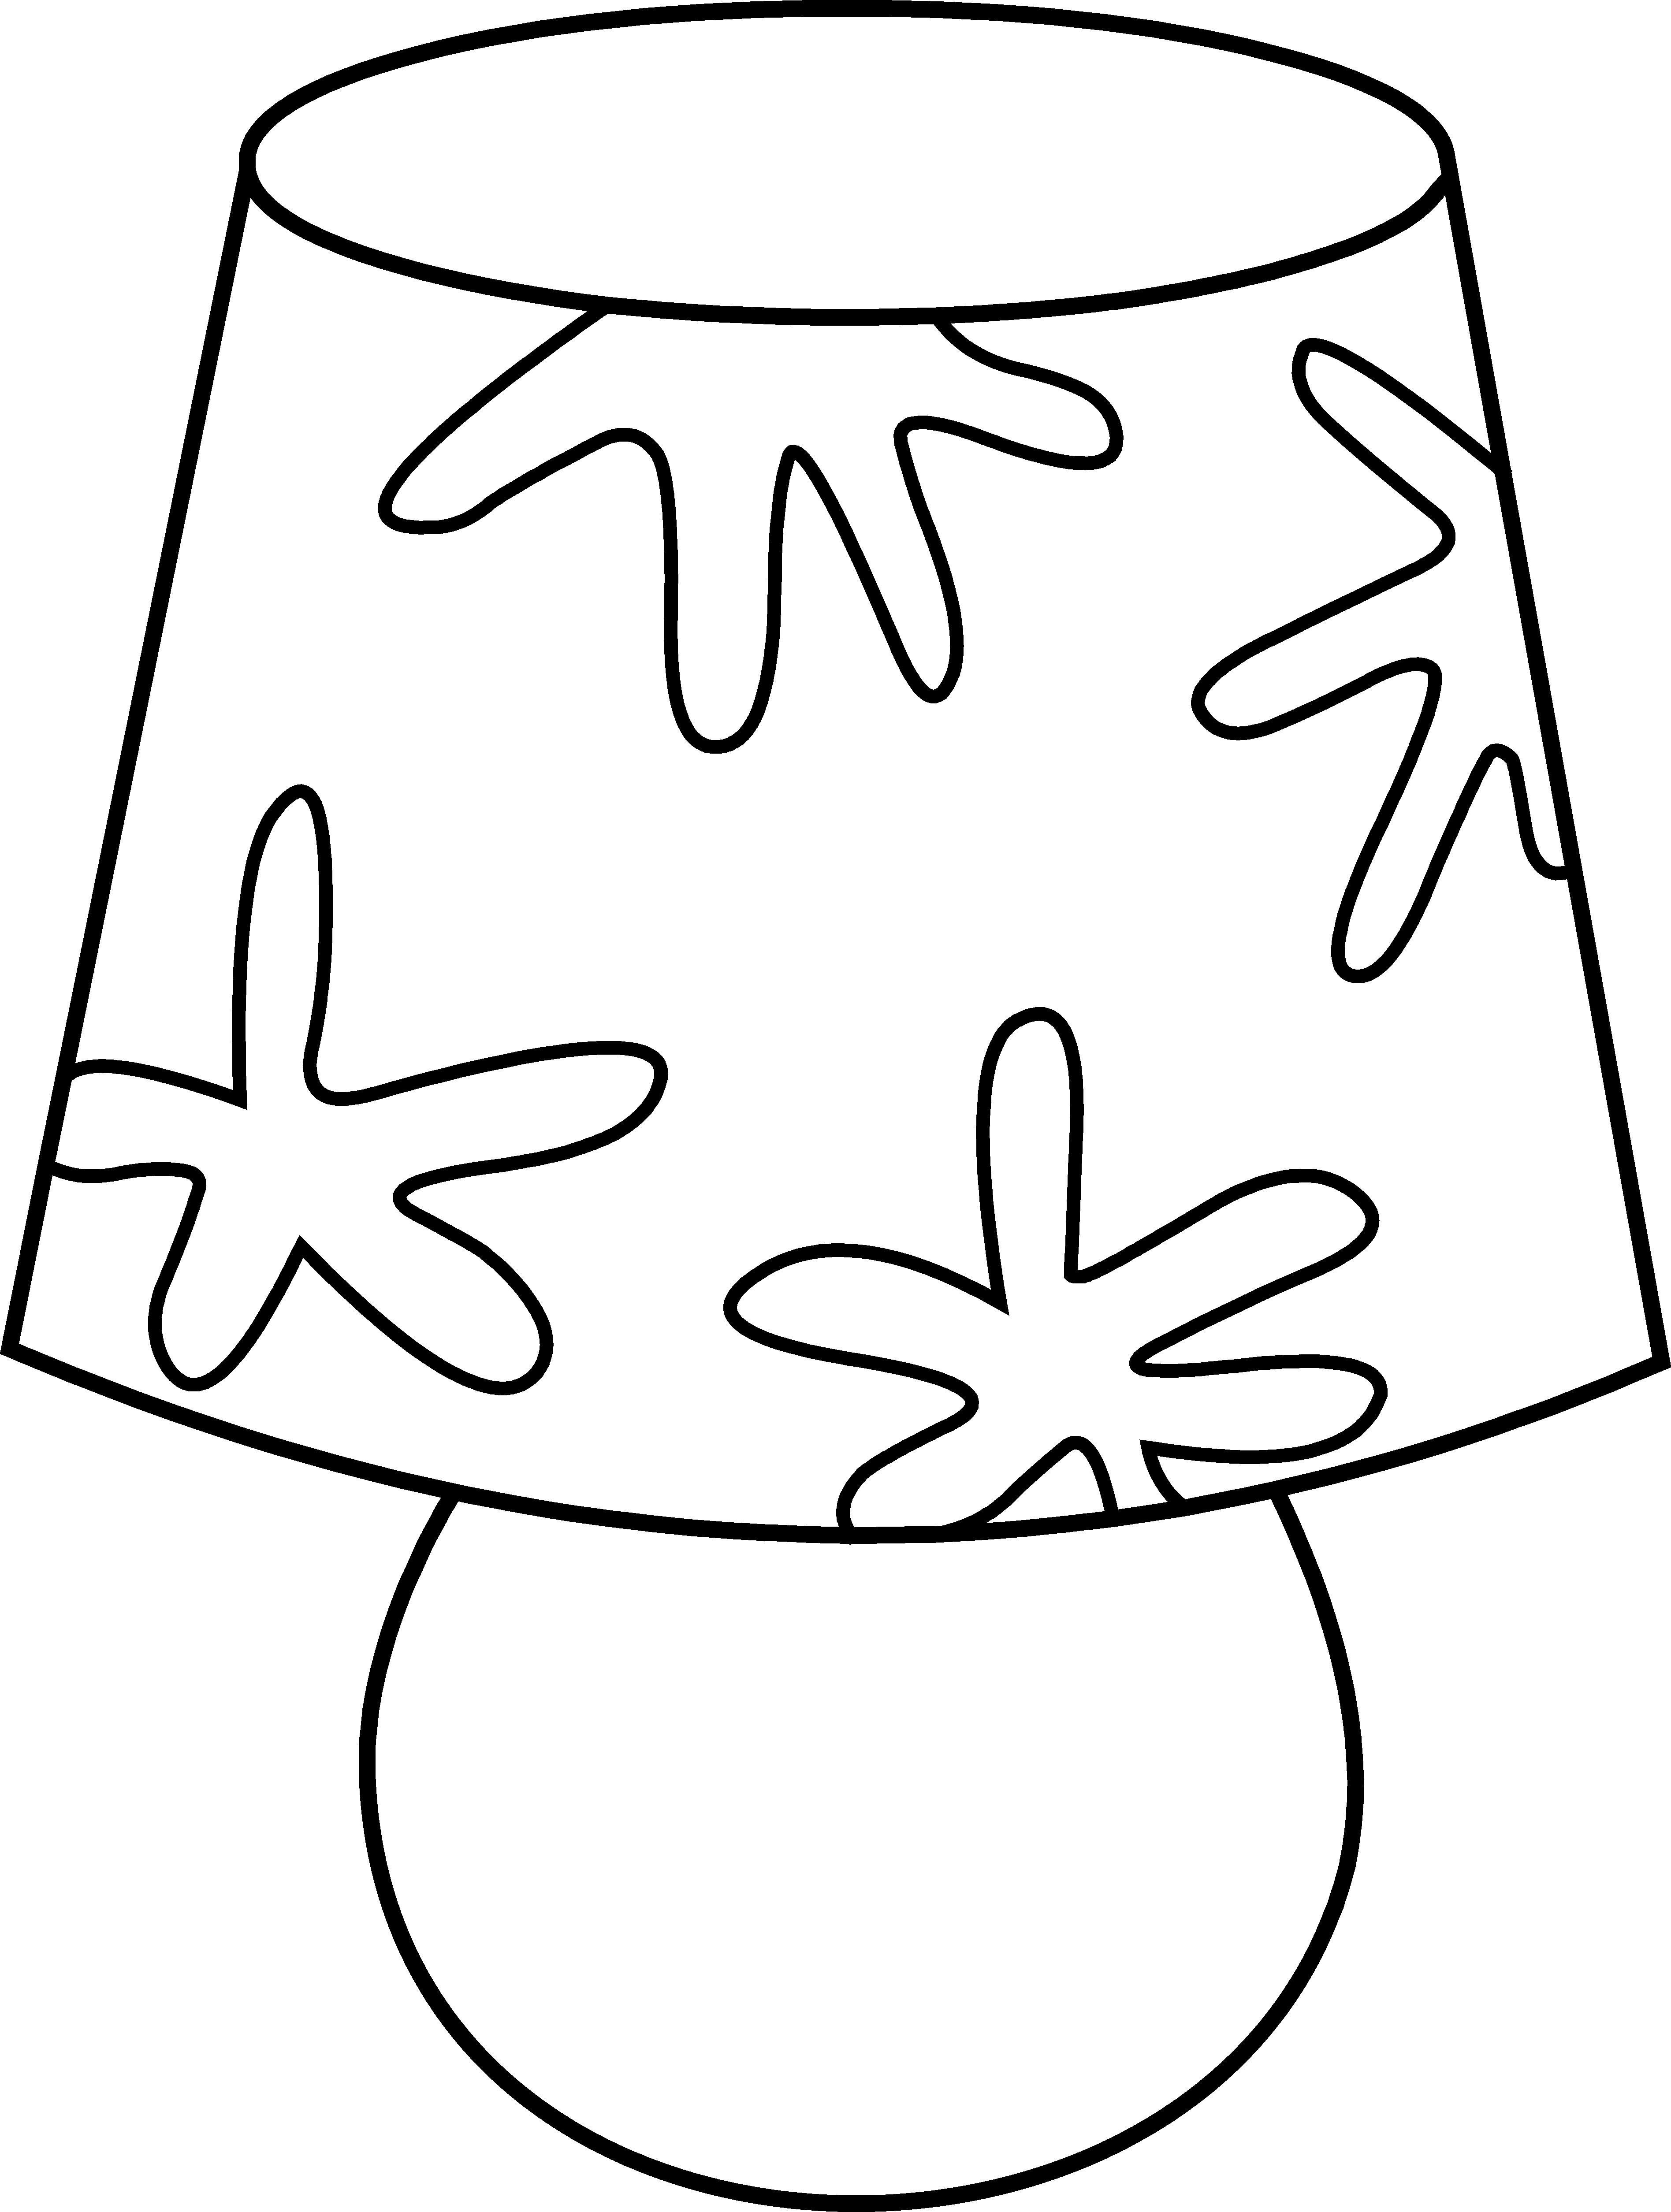 Lamp Clipart Black And White | Clipart Panda - Free Clipart Images